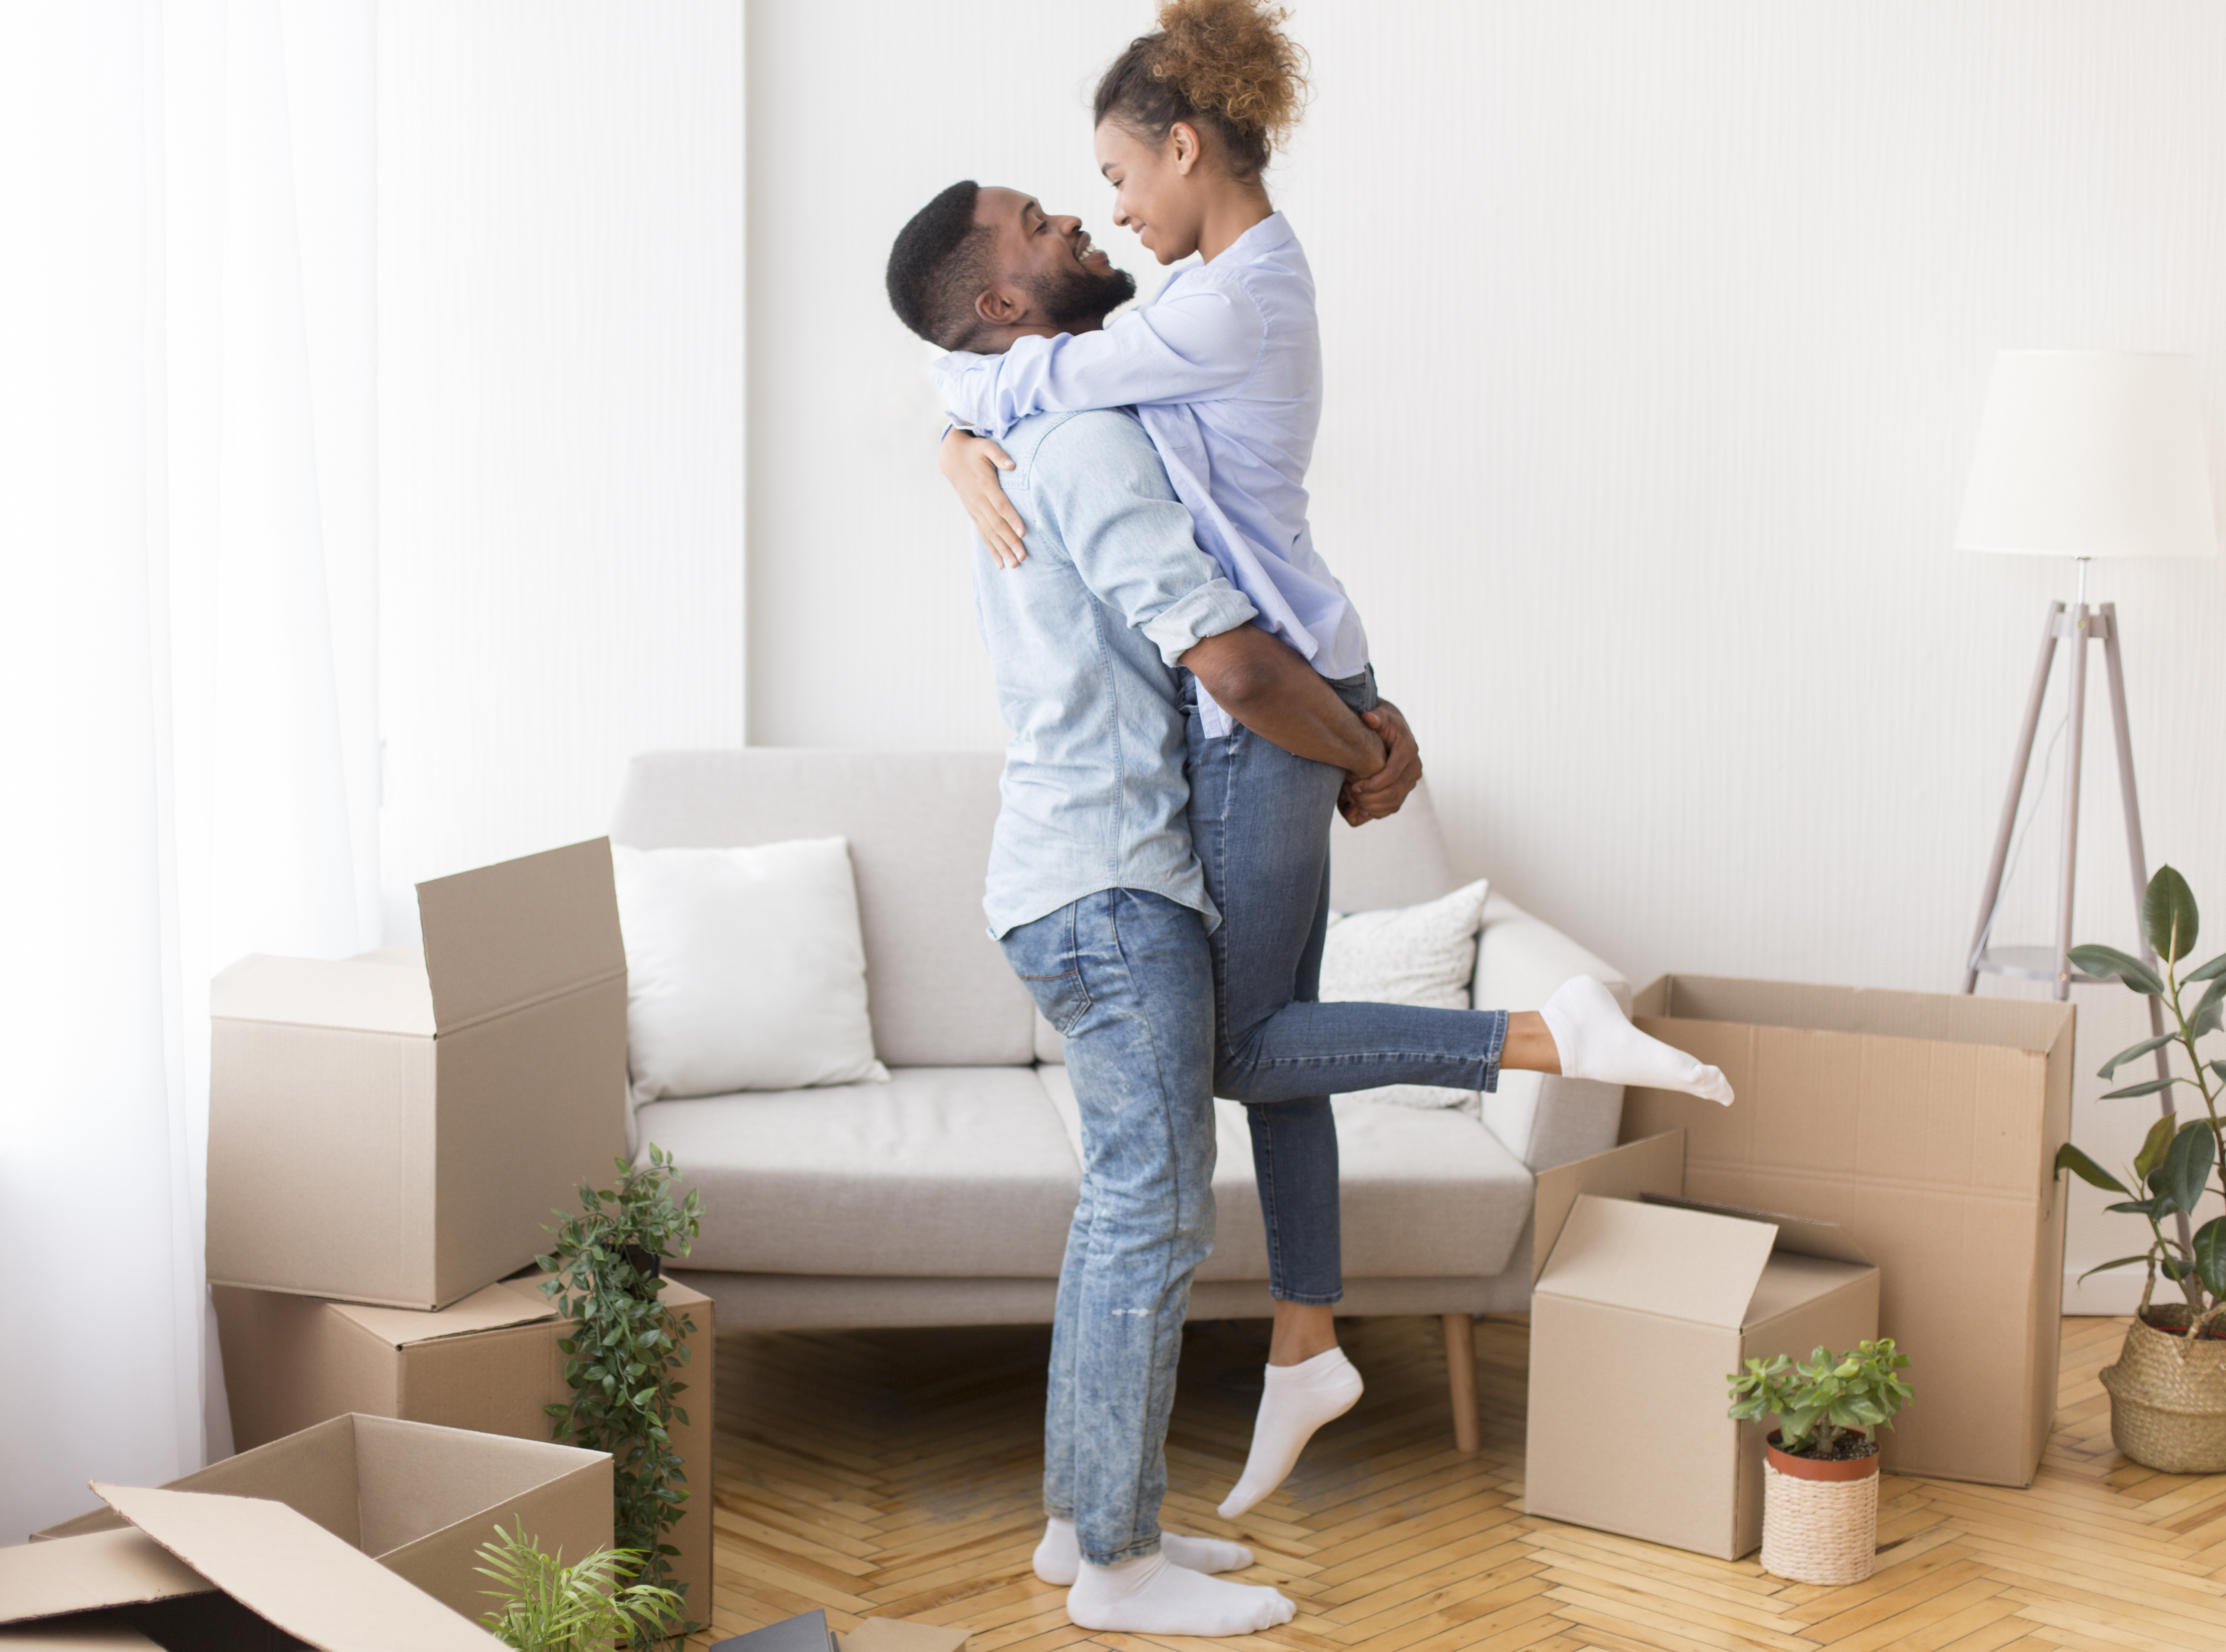 Boyfriend Lifting Girlfriend Among Moving Boxes In New House